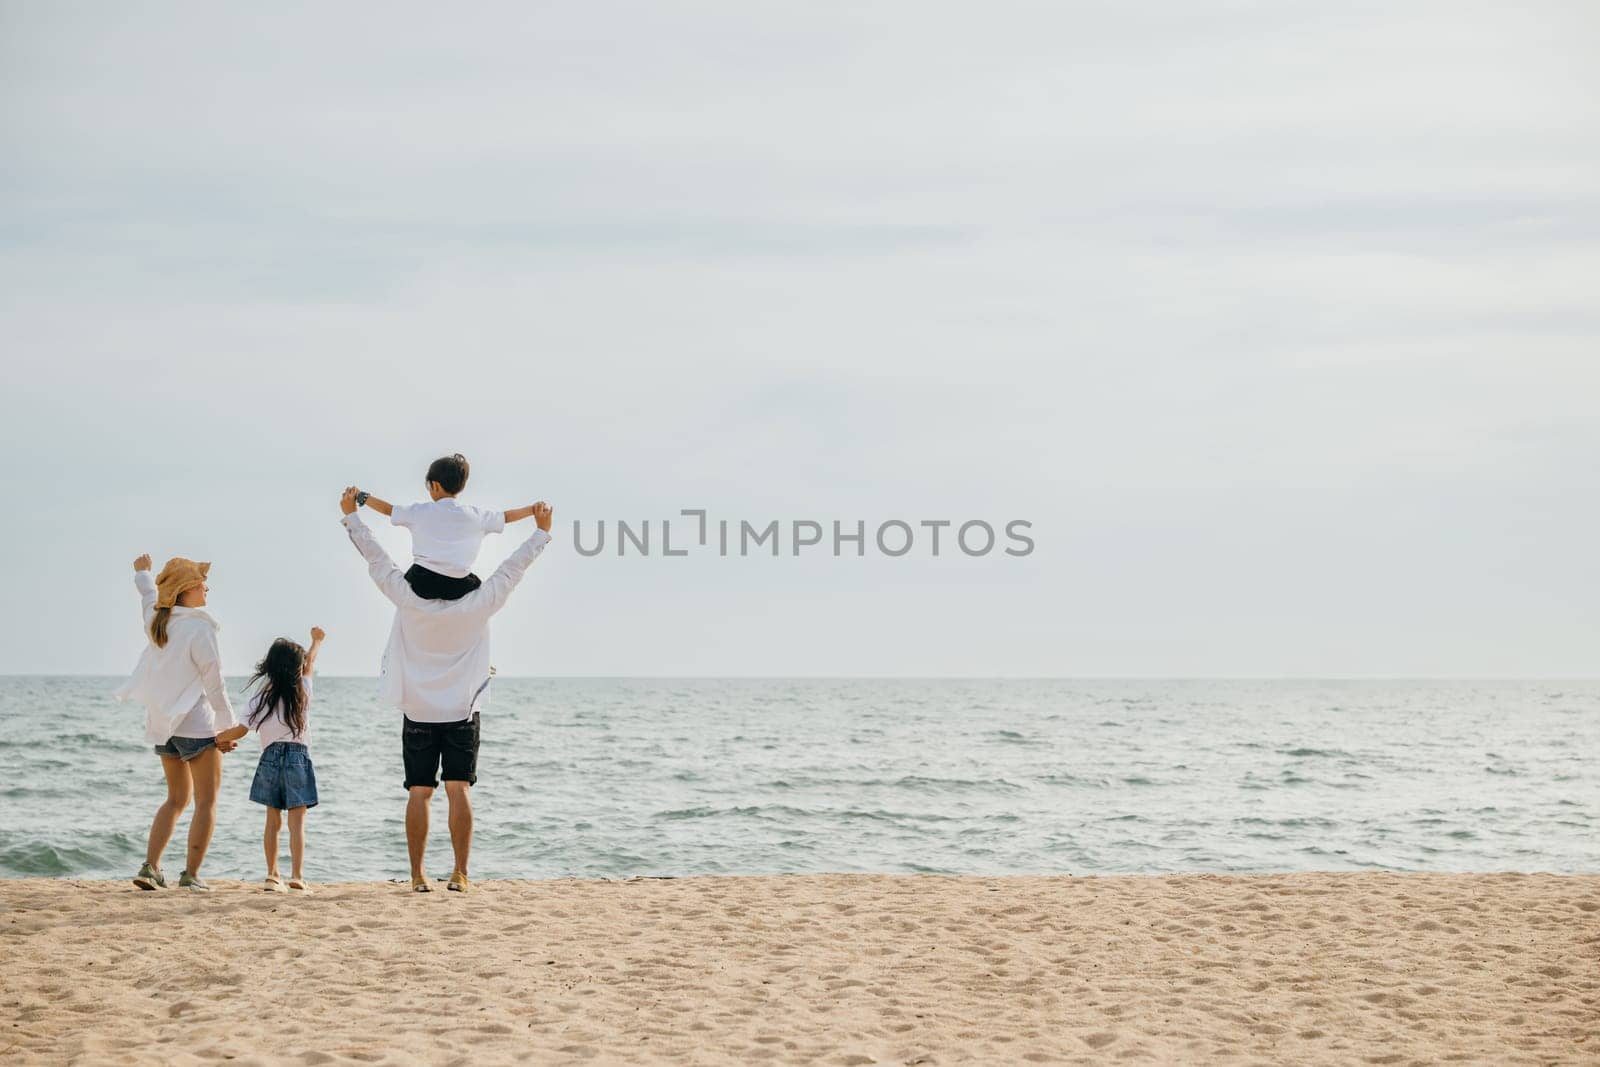 At the sea beach a family of four experiences happiness with raised arms at sunset. The father carrying his son on shoulders captures the carefree moments of a memorable summer vacation. by Sorapop